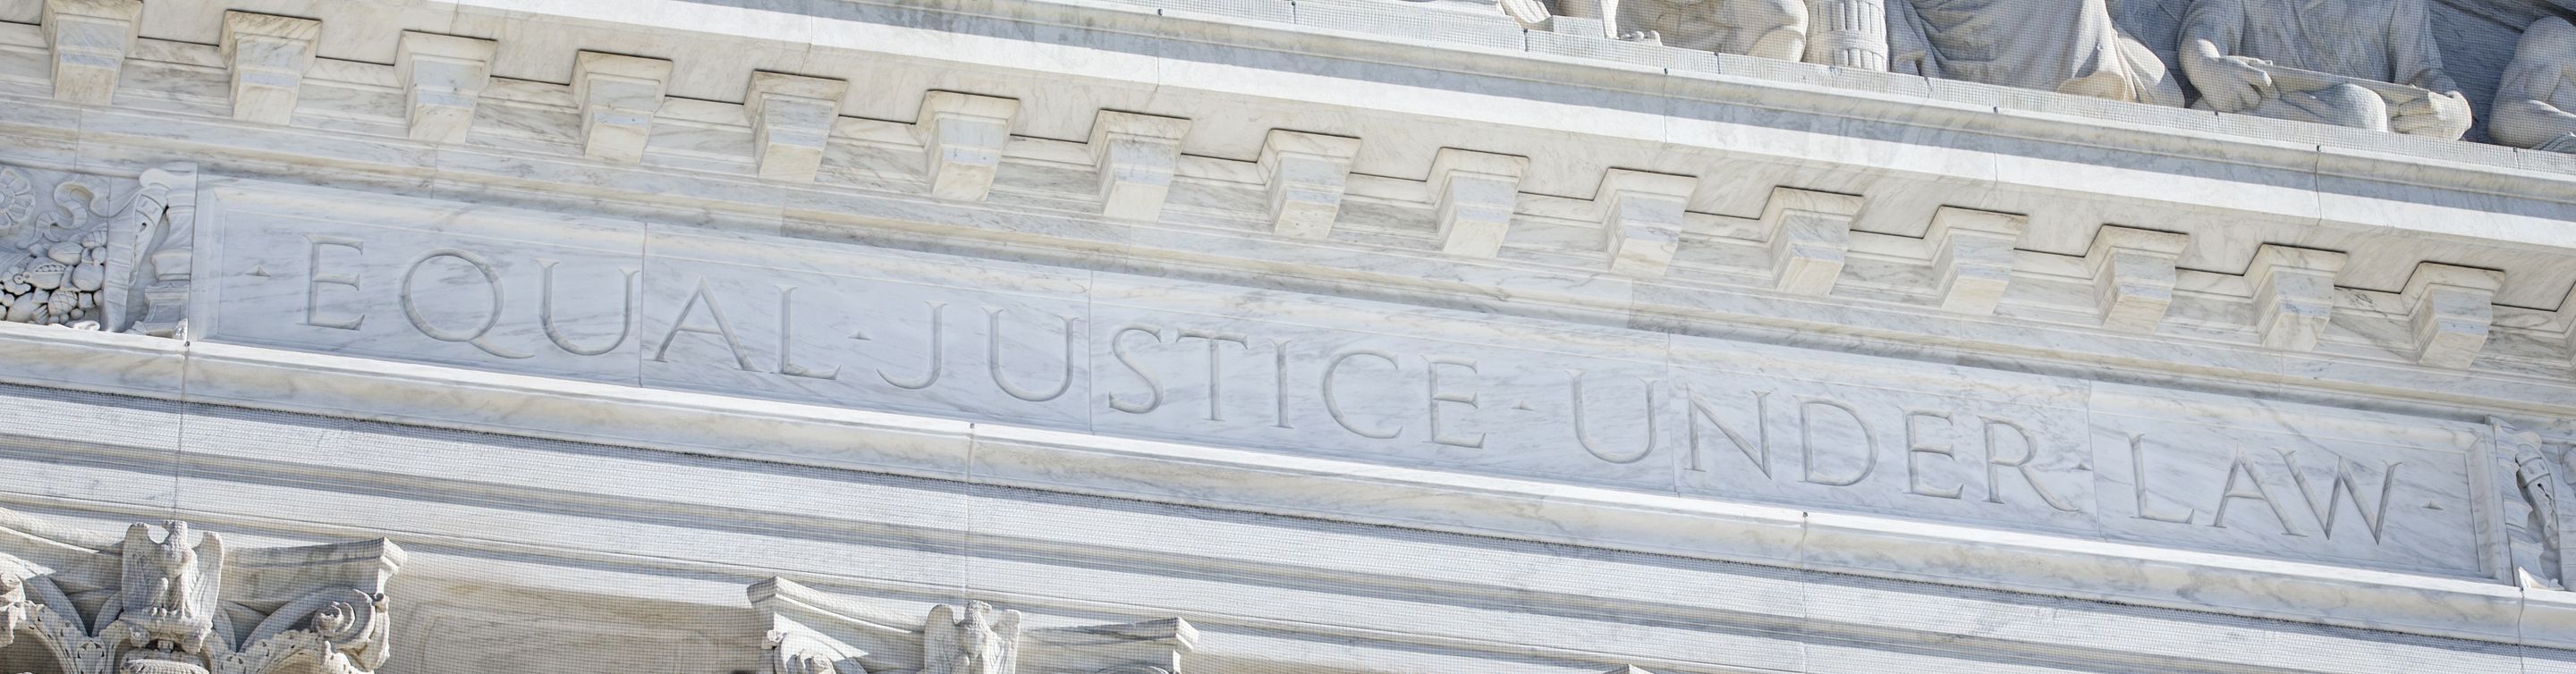 Supreme Court Limits Federal Court Jurisdiction To Vacate Or Confirm Arbitration Awards 